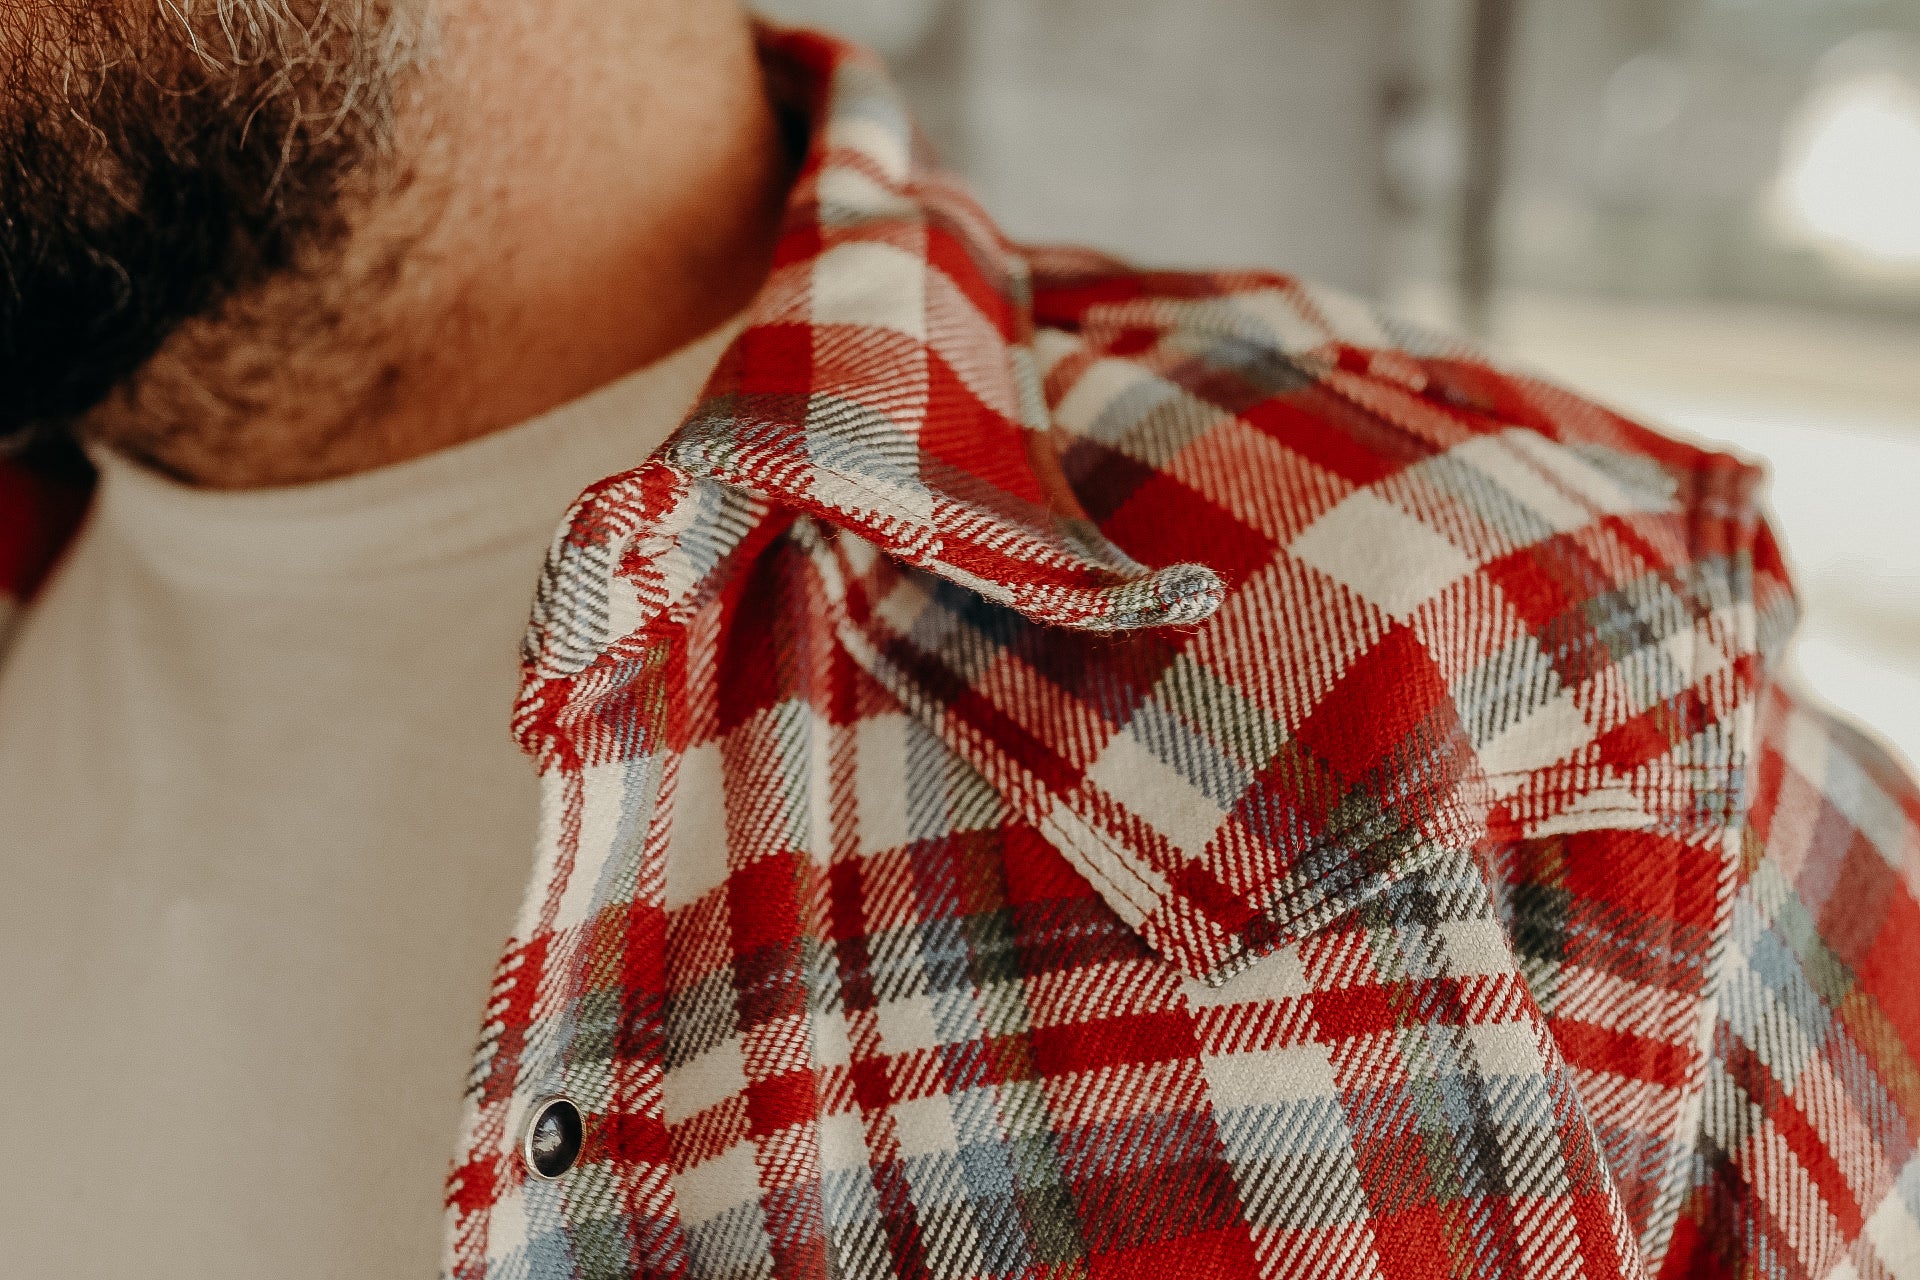 Ultra Heavy Flannel Crazy Check Western Shirt - Red